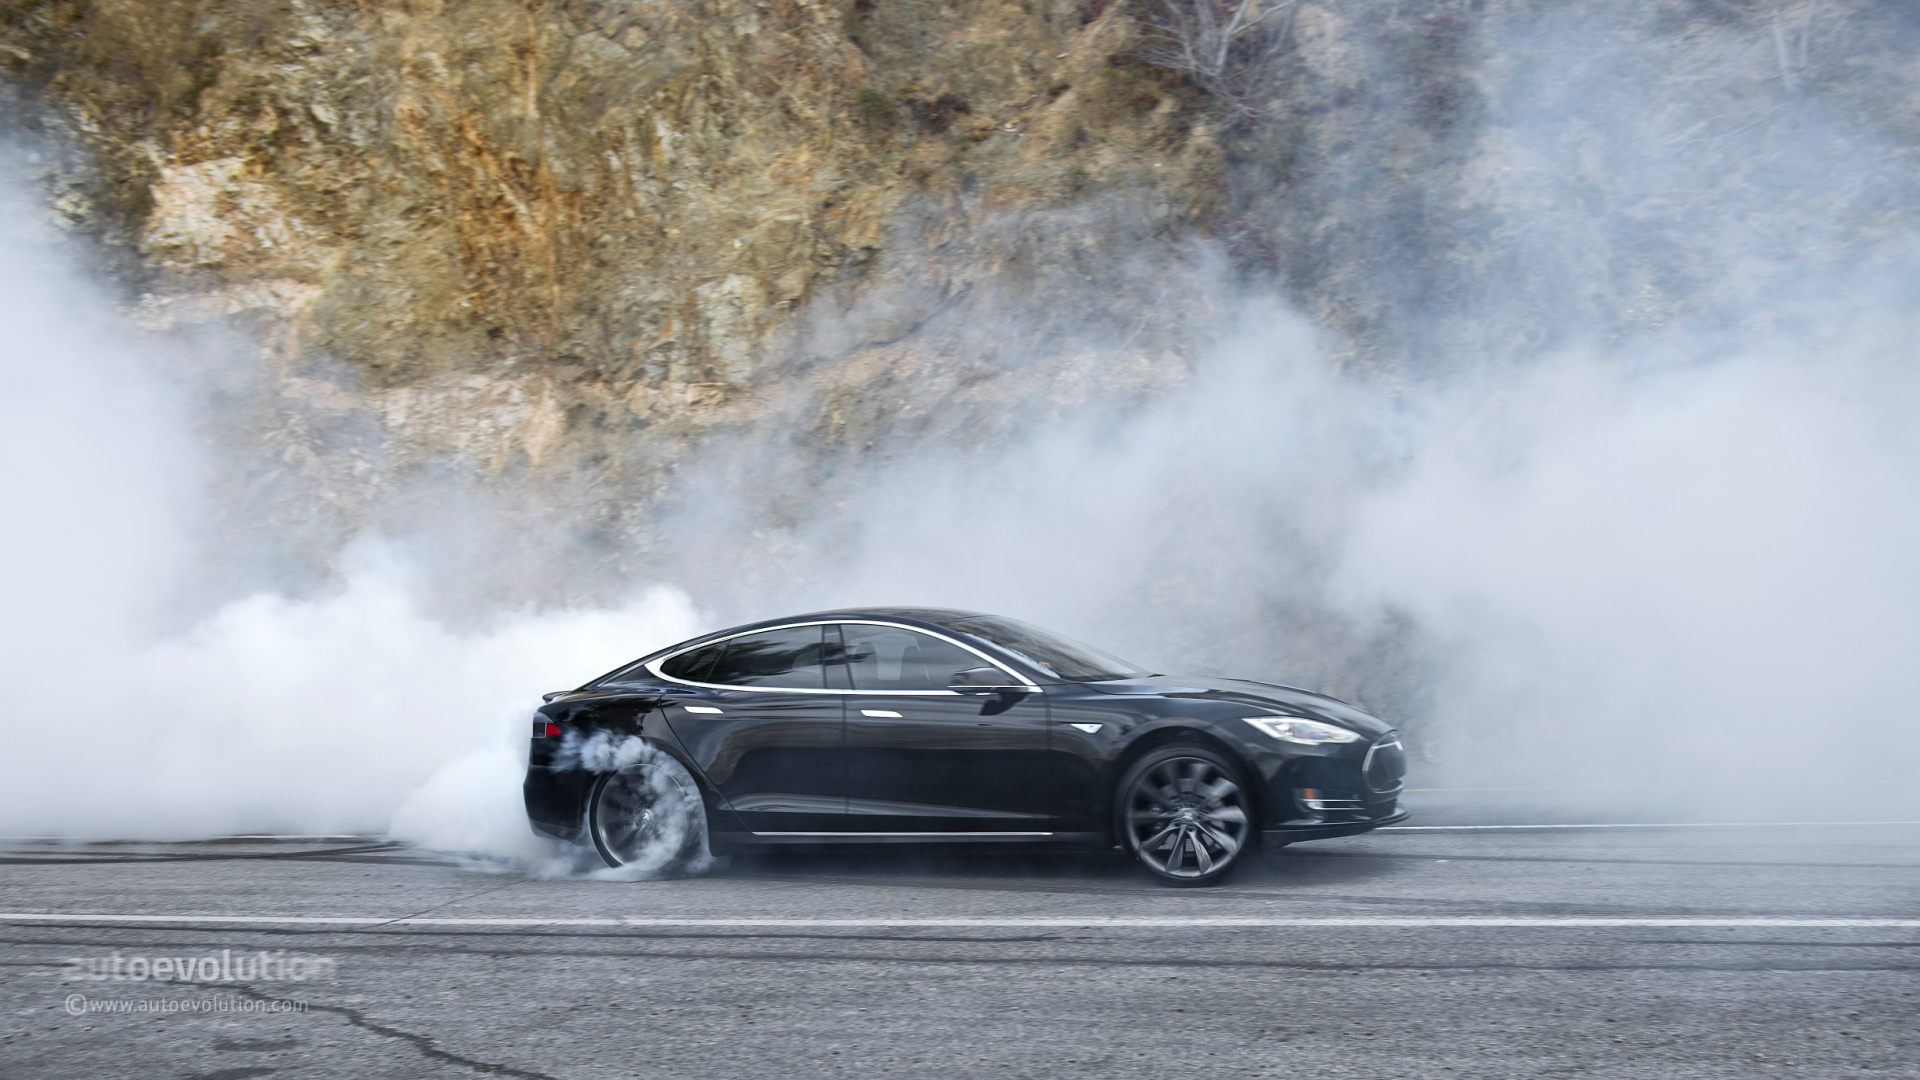 UPDATE: Tesla Model S P85D - 2.8-Second 0 to 60 MPH Launch May Be Possible With Firmware Update